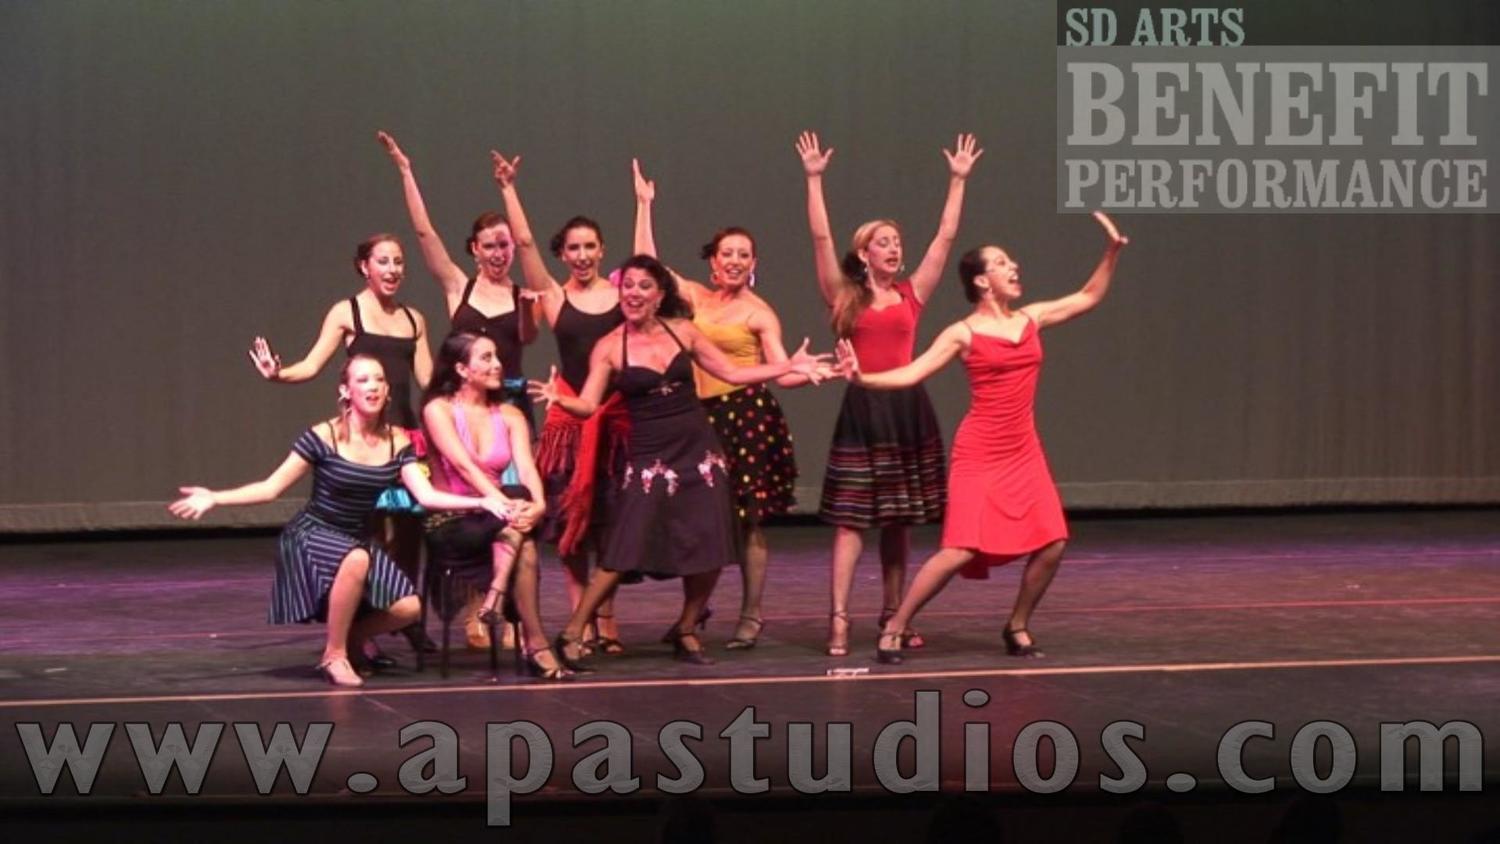 SD ARTS Benefit Performance featuring Broadway's Roxane Carrasco as Anita in WEST SIDE STORY